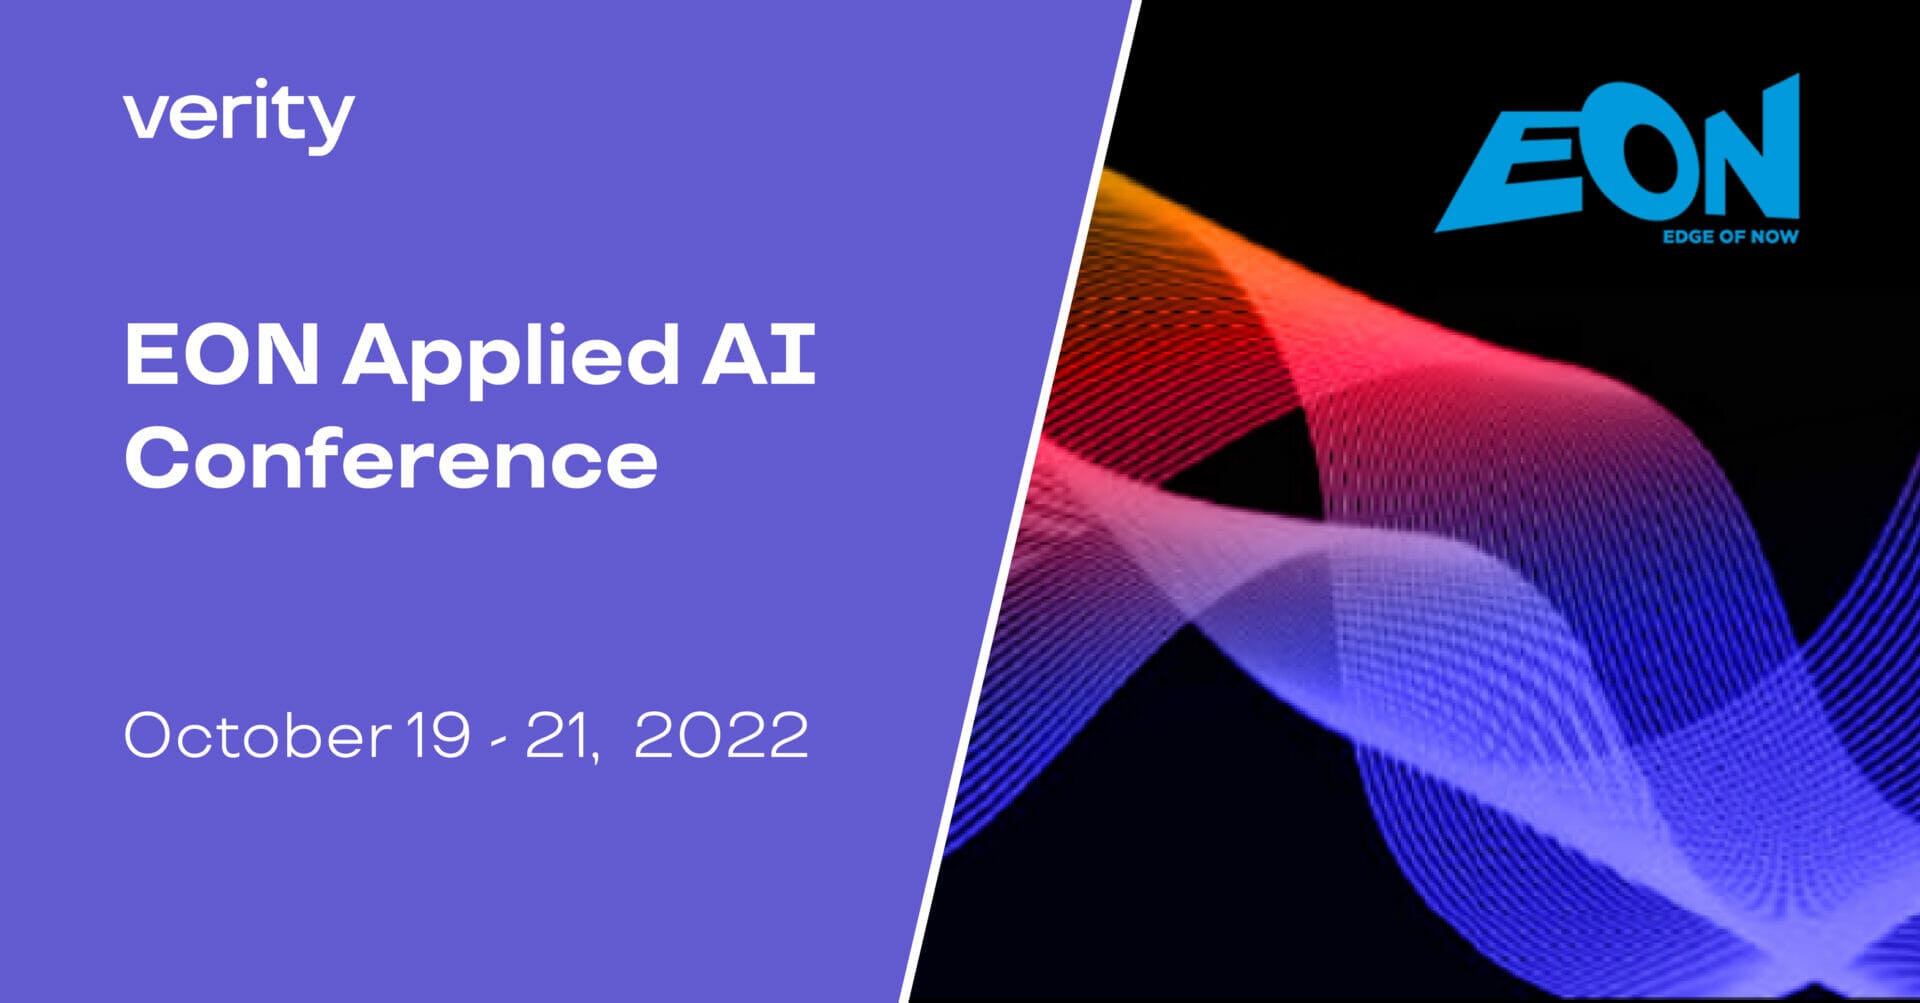 Eon Applied AI Conference verity